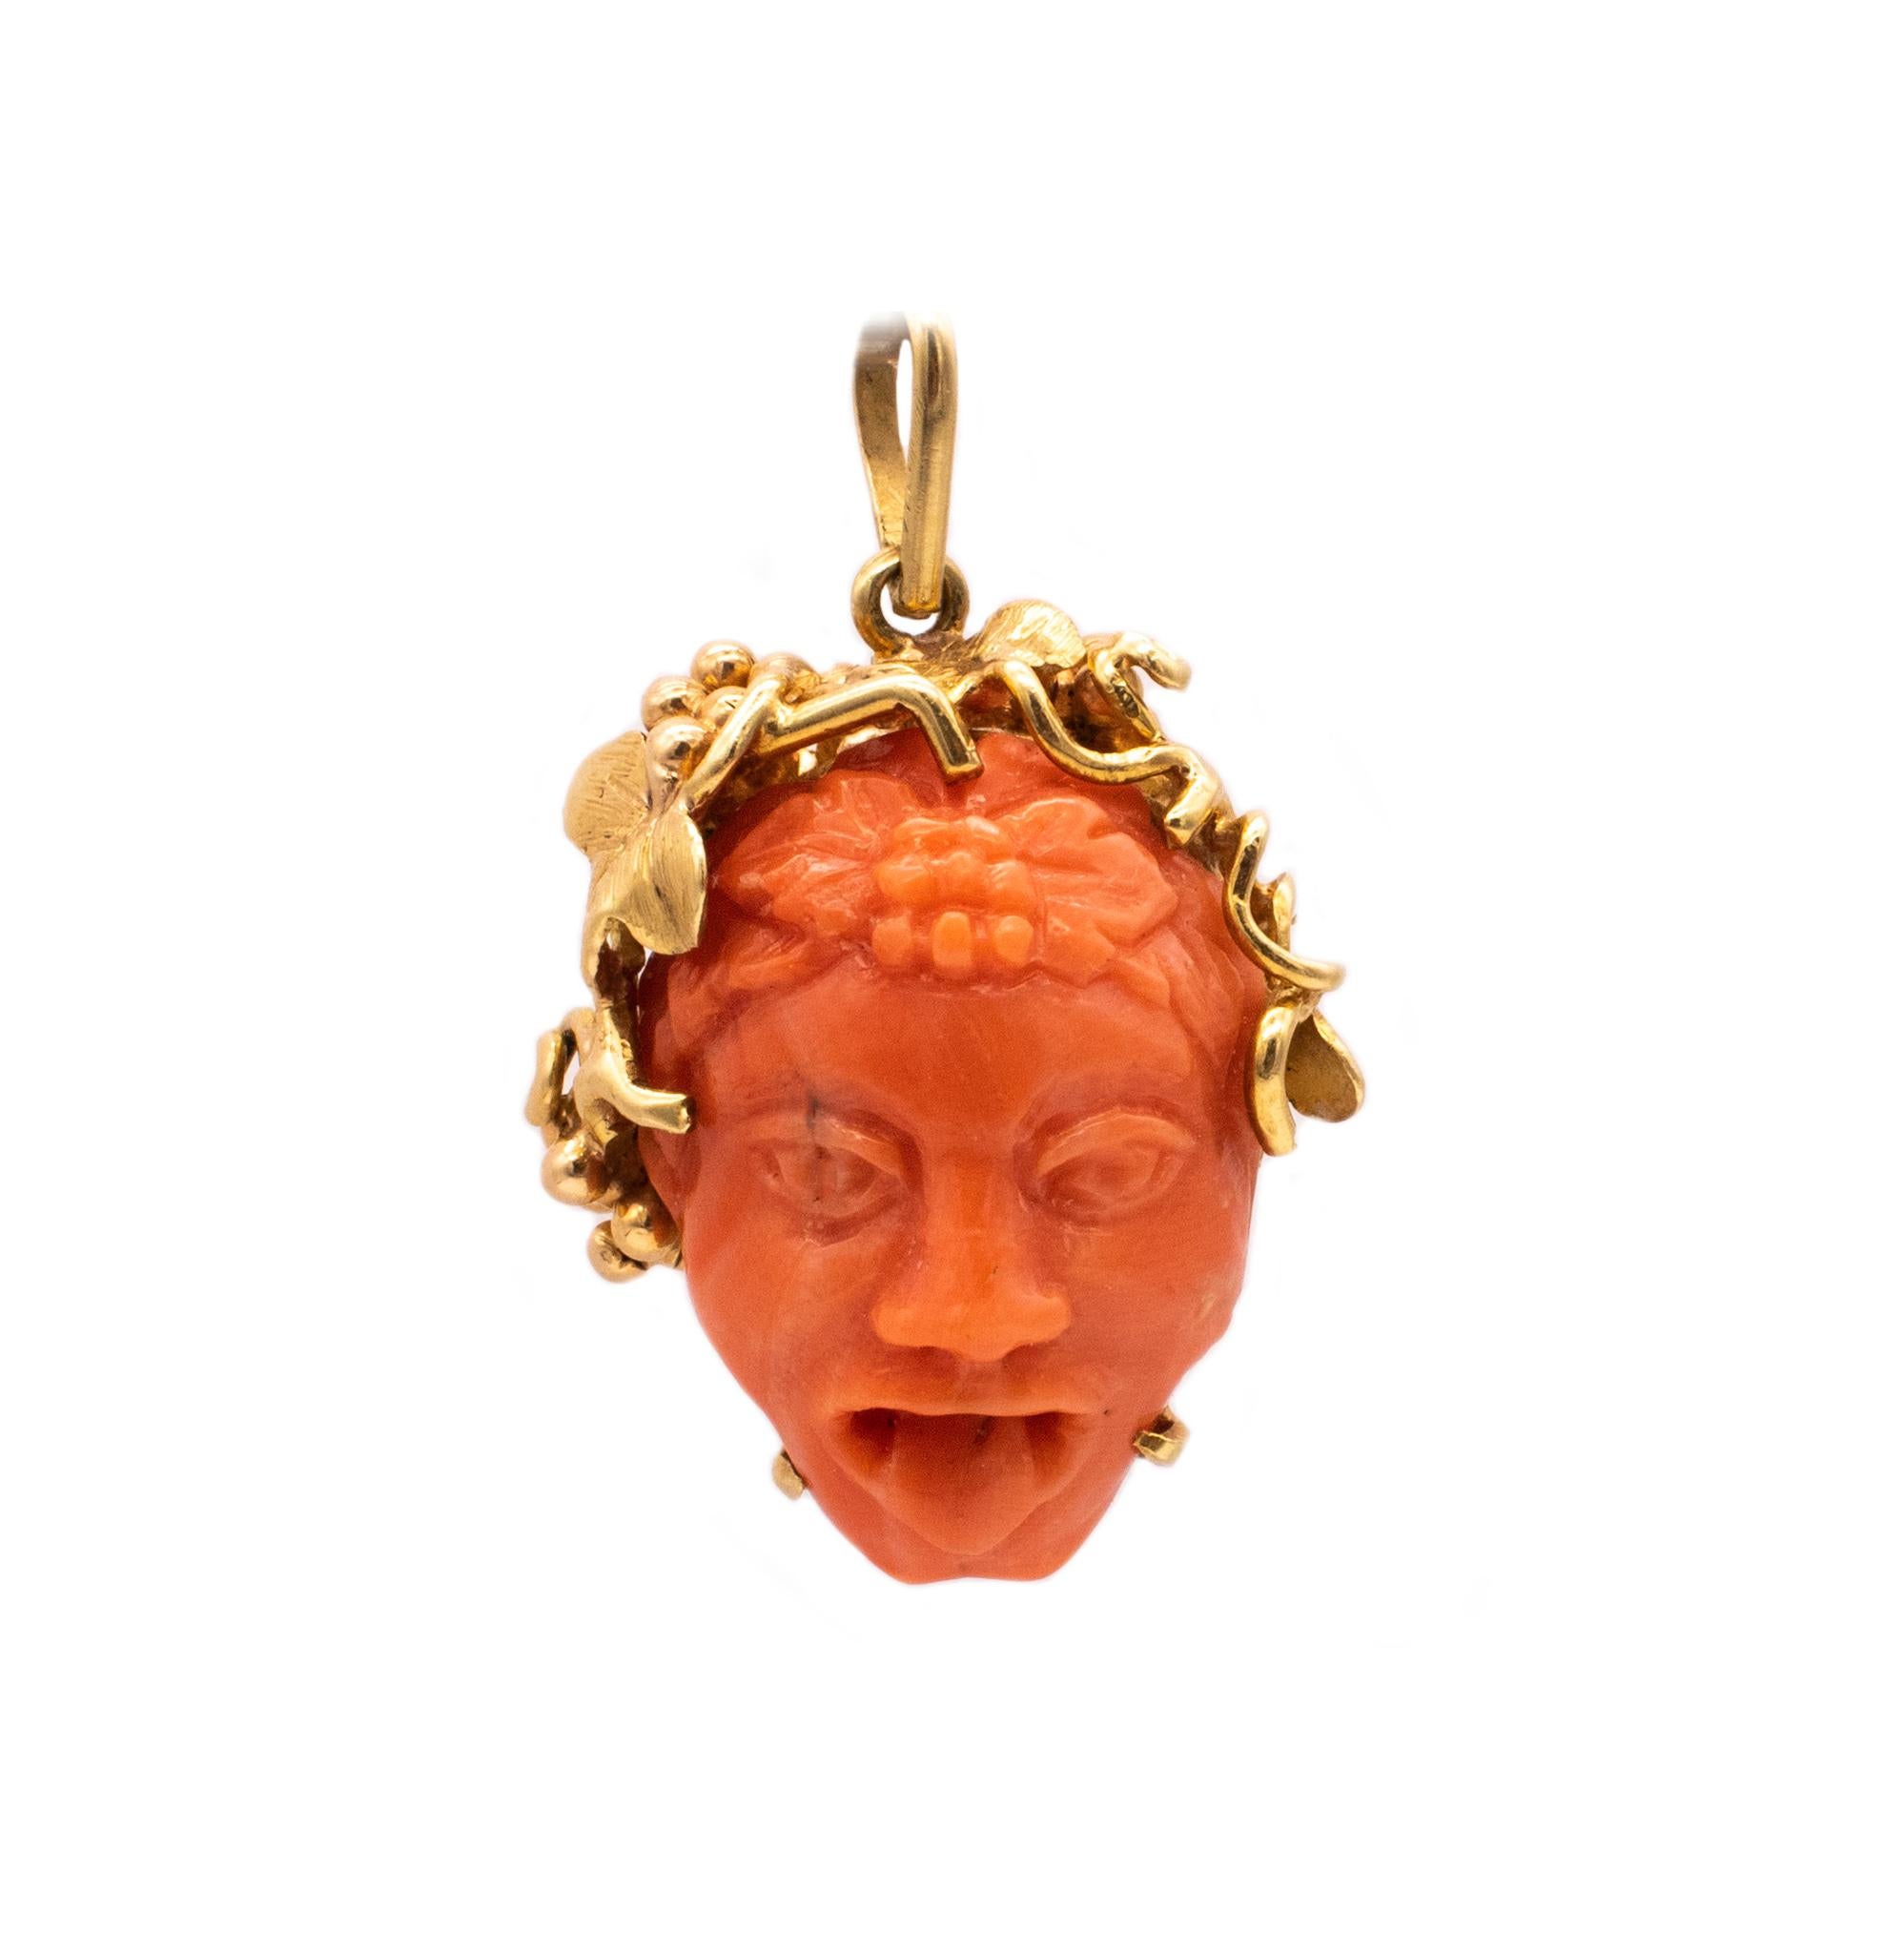 Bacchus bust pendant designed by Spritzer & Fuhrmann.

A vintage unusual and sculptural piece from the mid century period, circa 1960's. It was crafted in 18 karats yellow gold and display the Italianate Grotesque portrait face of Bacchus, the